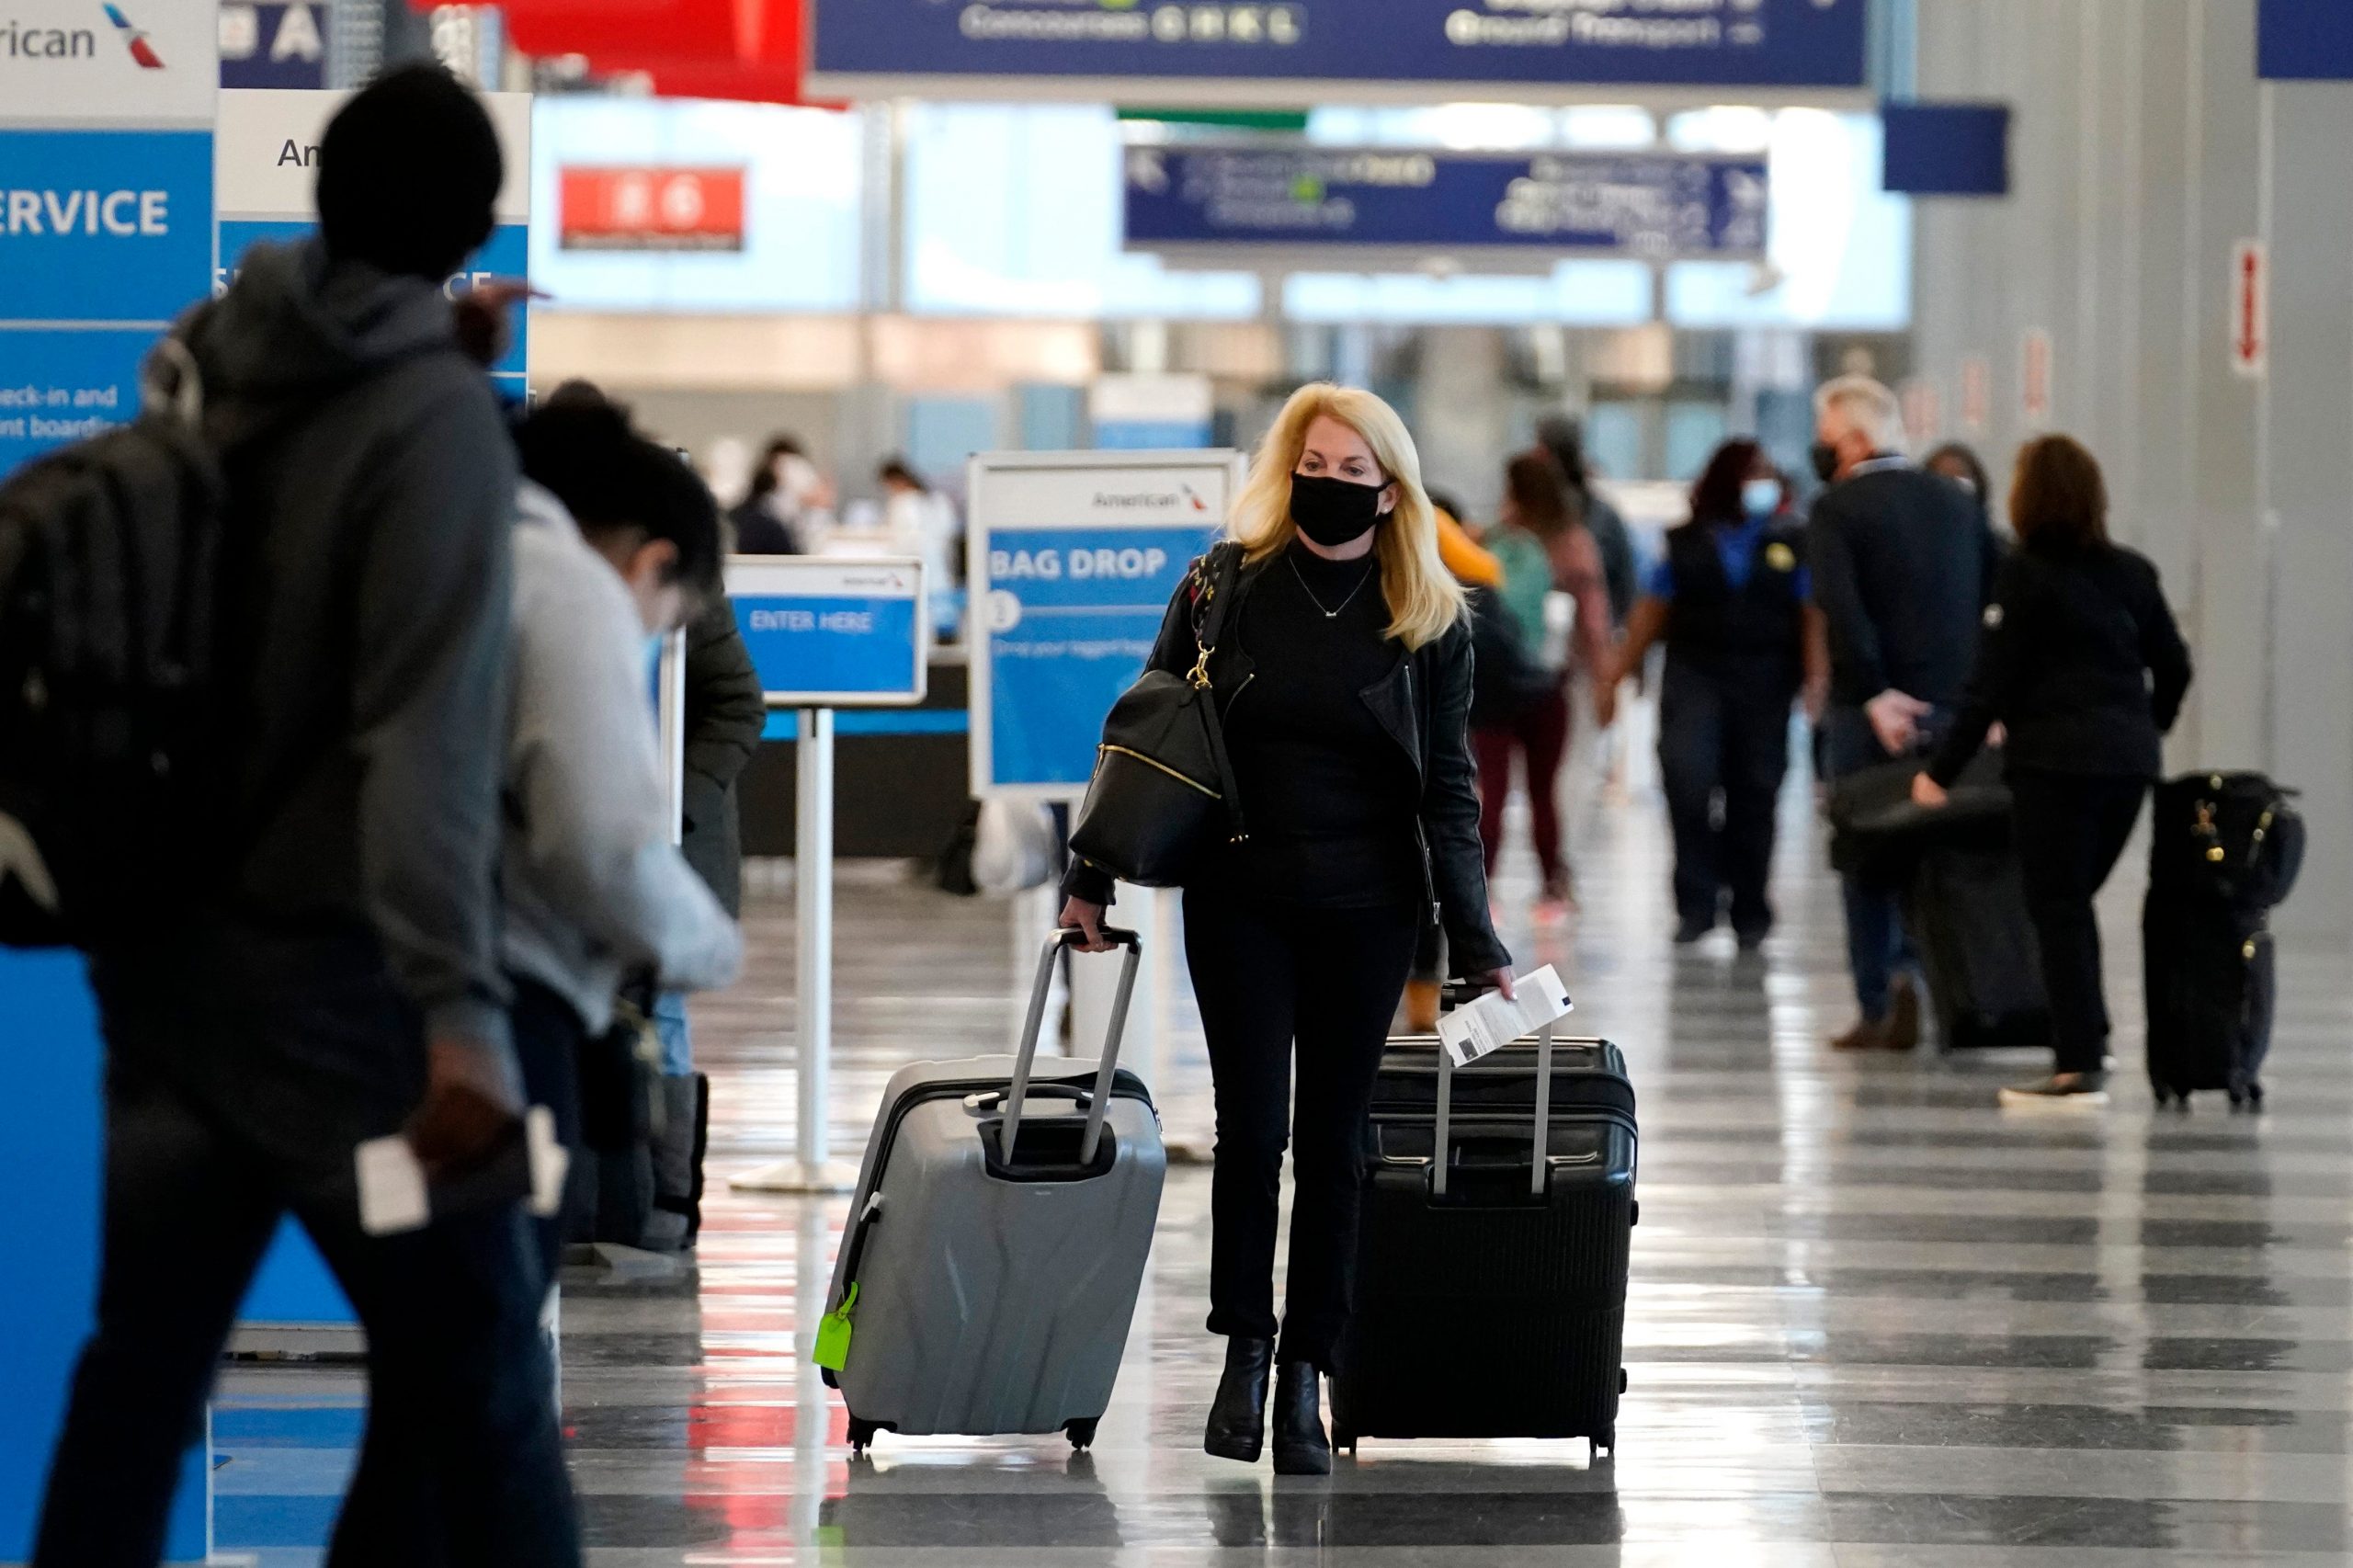 A woman in a mask pulls two suitcases through an airport terminal